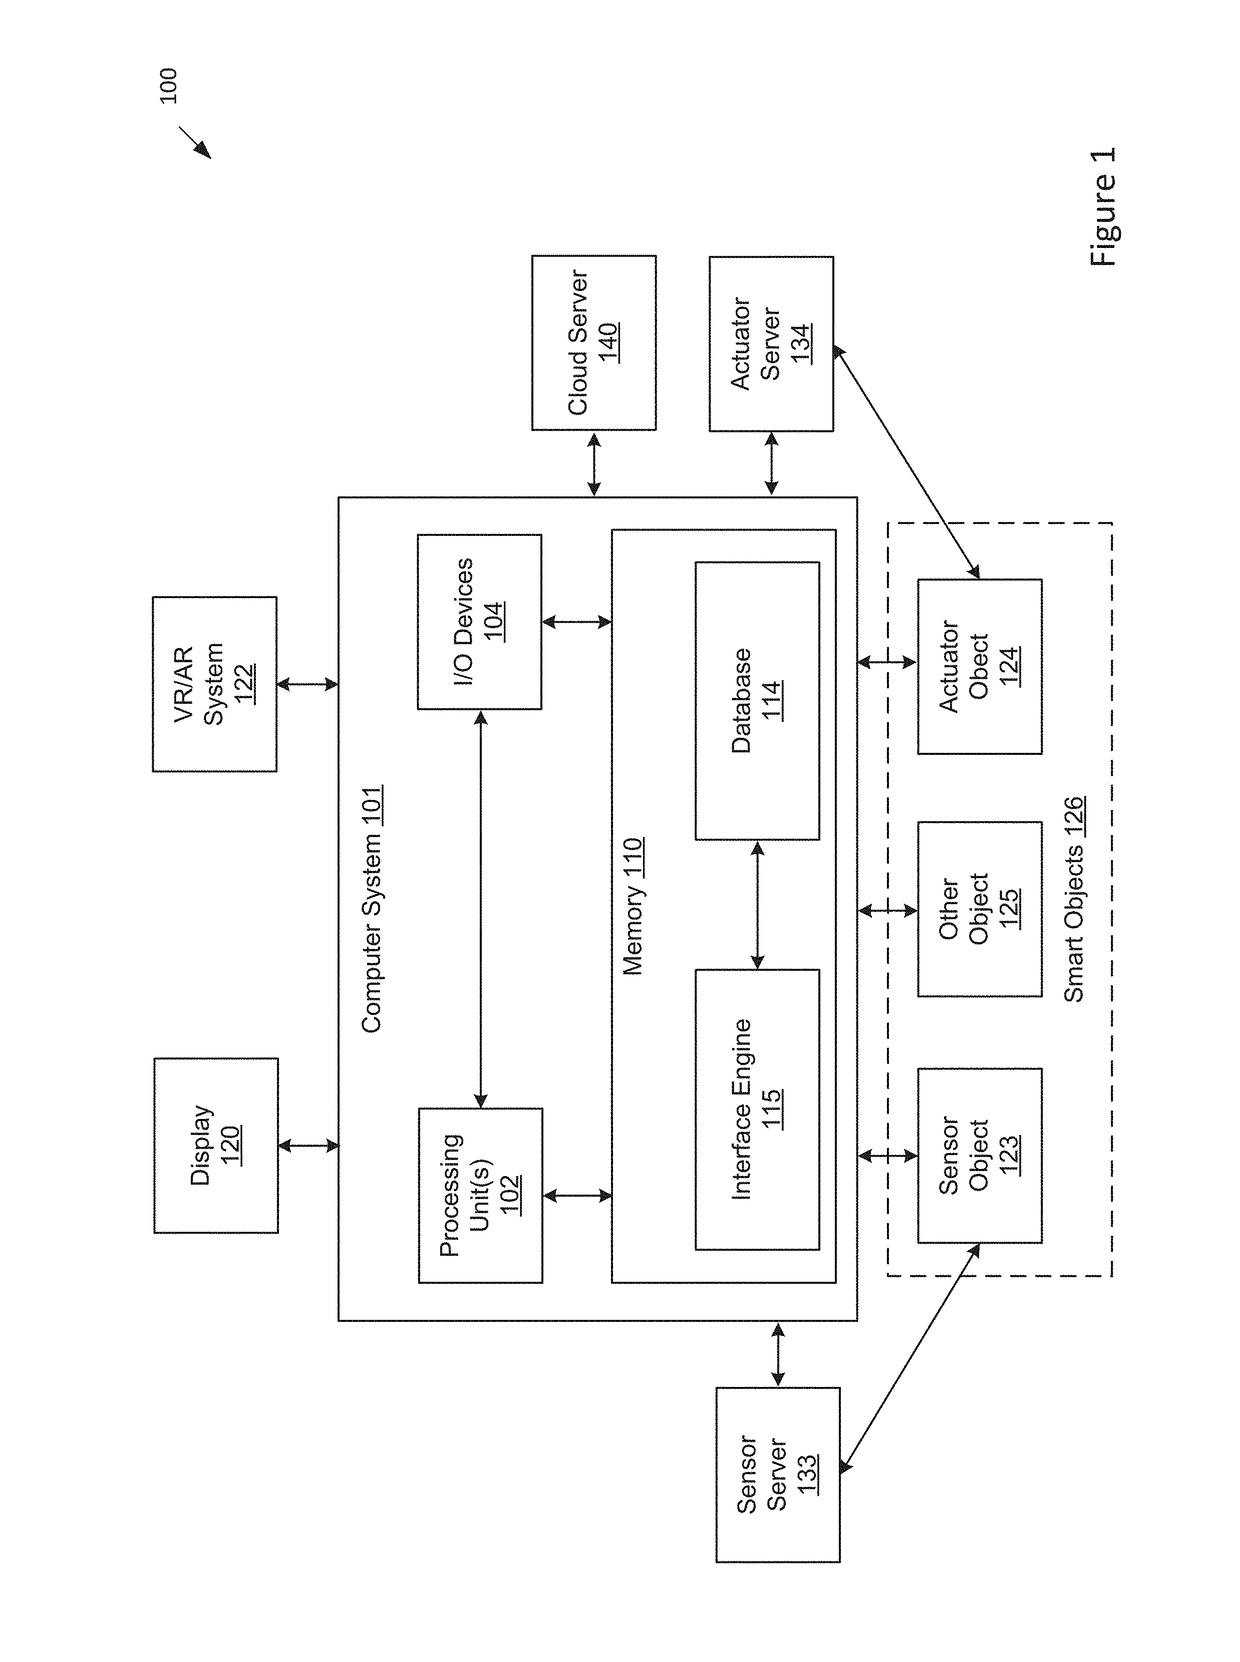 Three dimensional visual programming interface for a network of devices